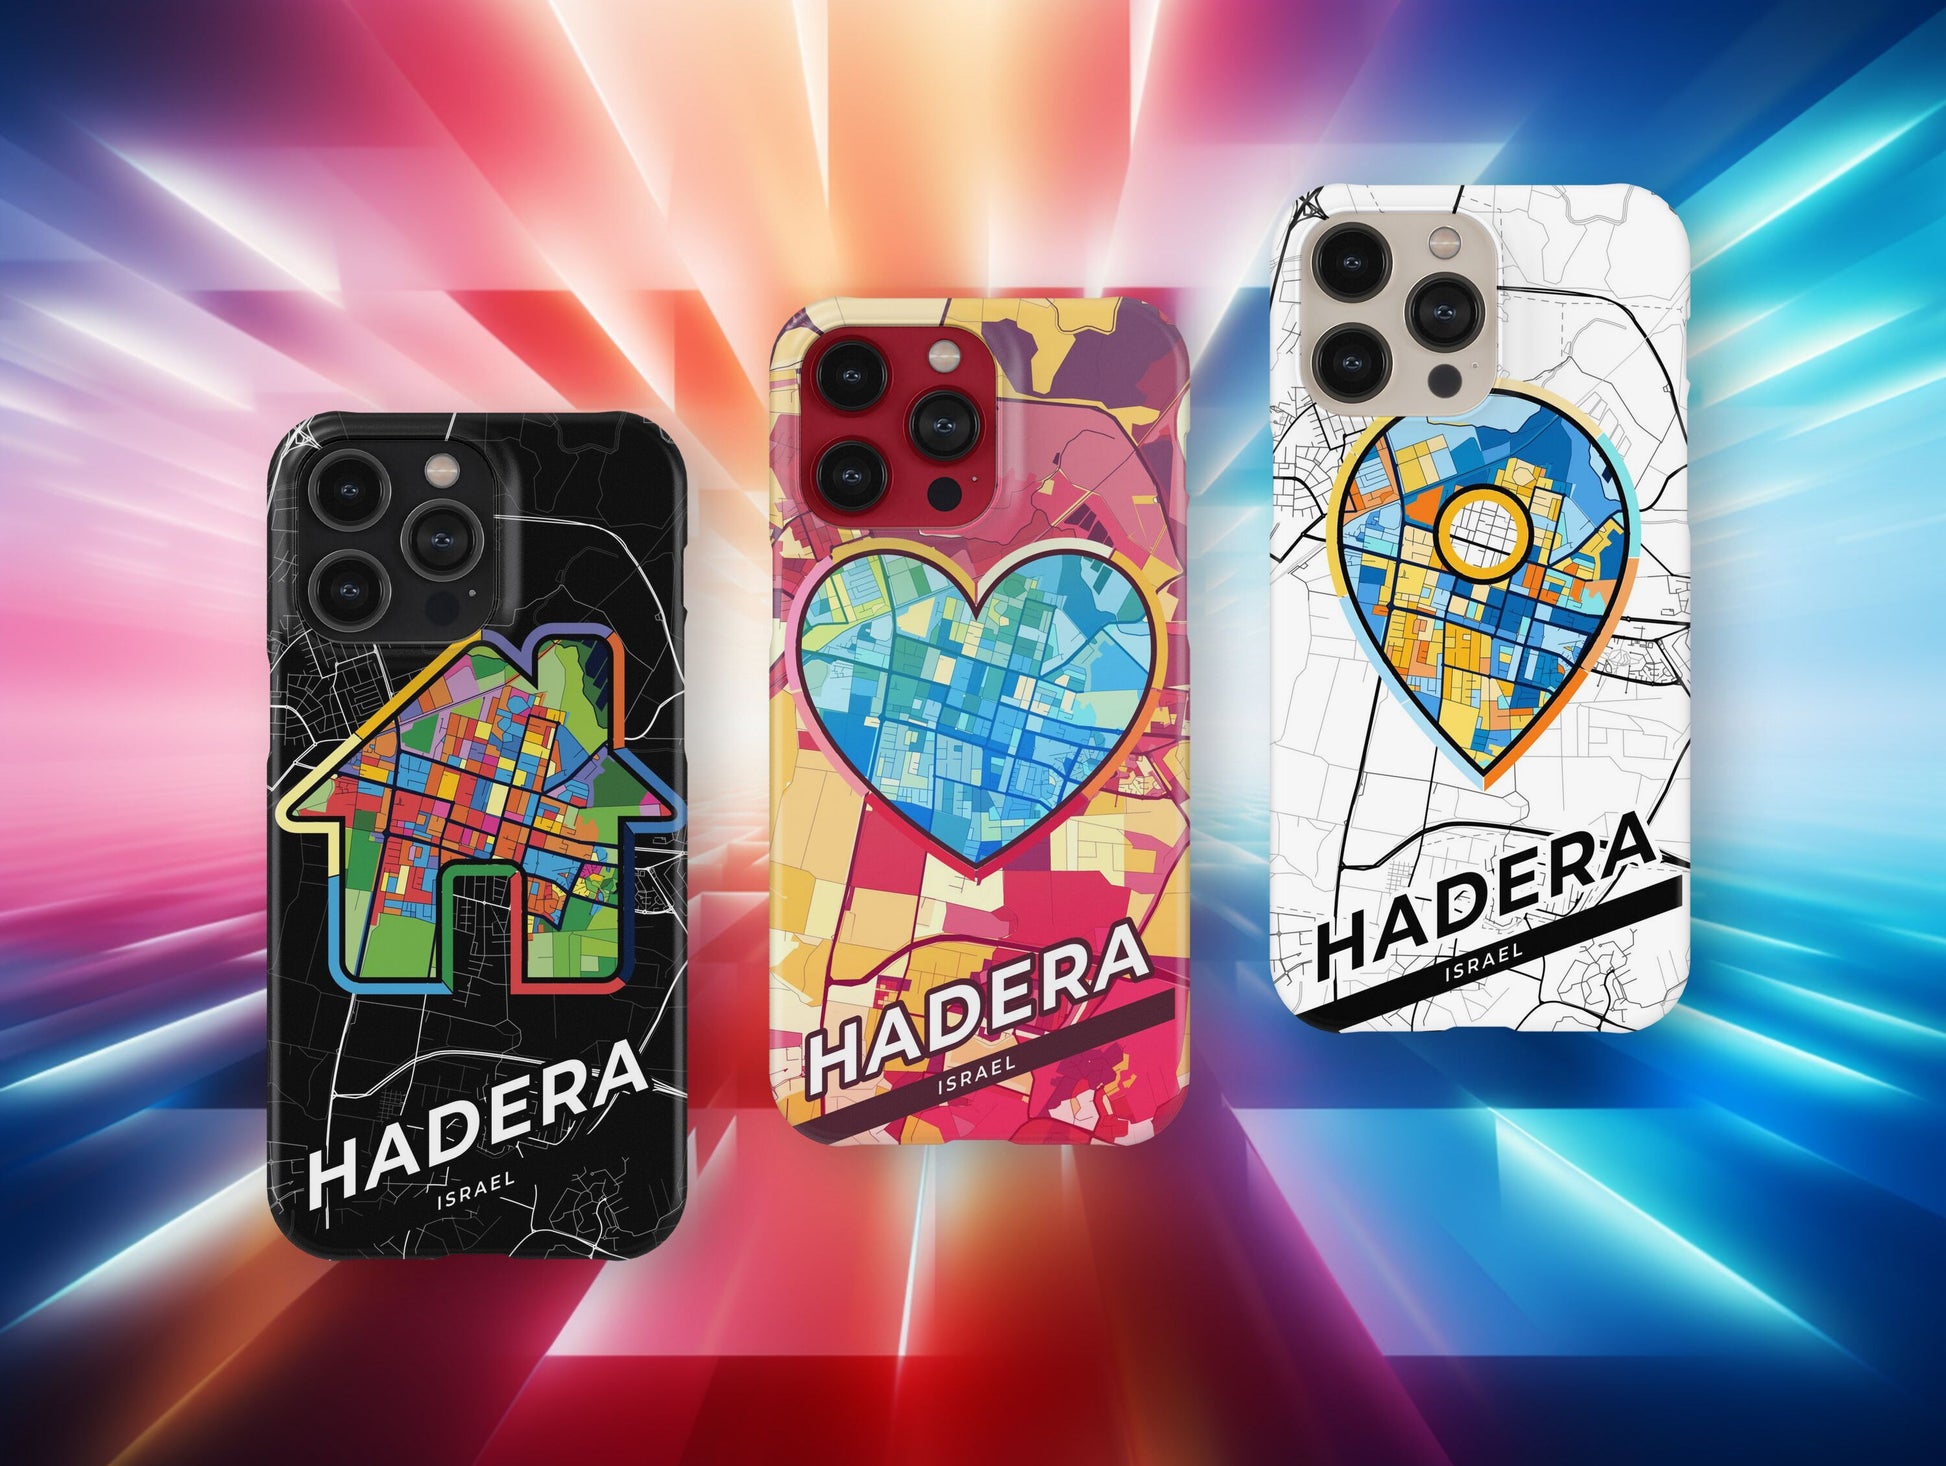 Hadera Israel slim phone case with colorful icon. Birthday, wedding or housewarming gift. Couple match cases.